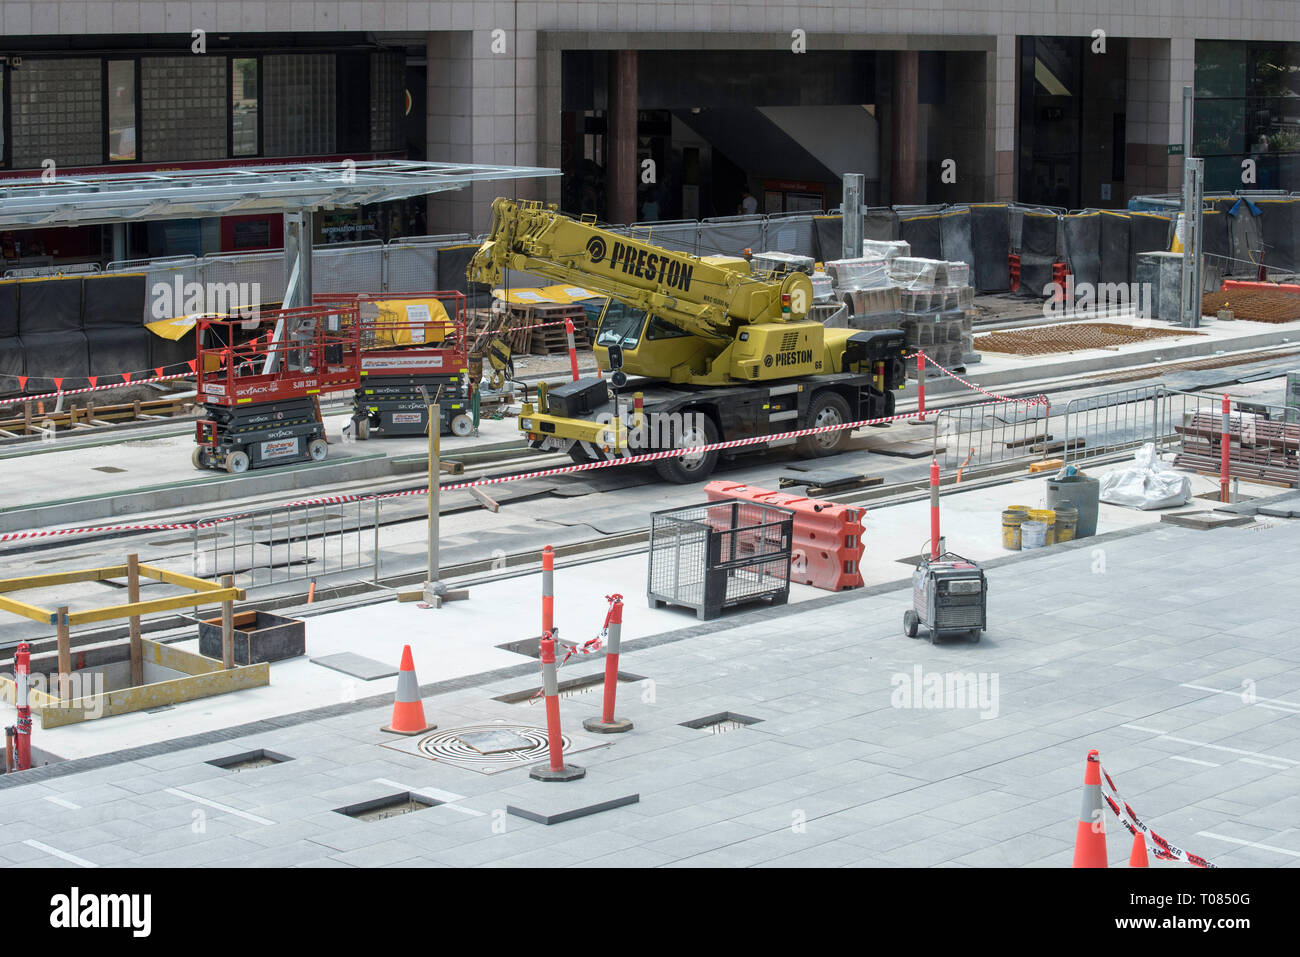 Sydney Australia, Nov 2018: The almost completed Circular Quay section of the new Sydney CBD Light Rail project Stock Photo